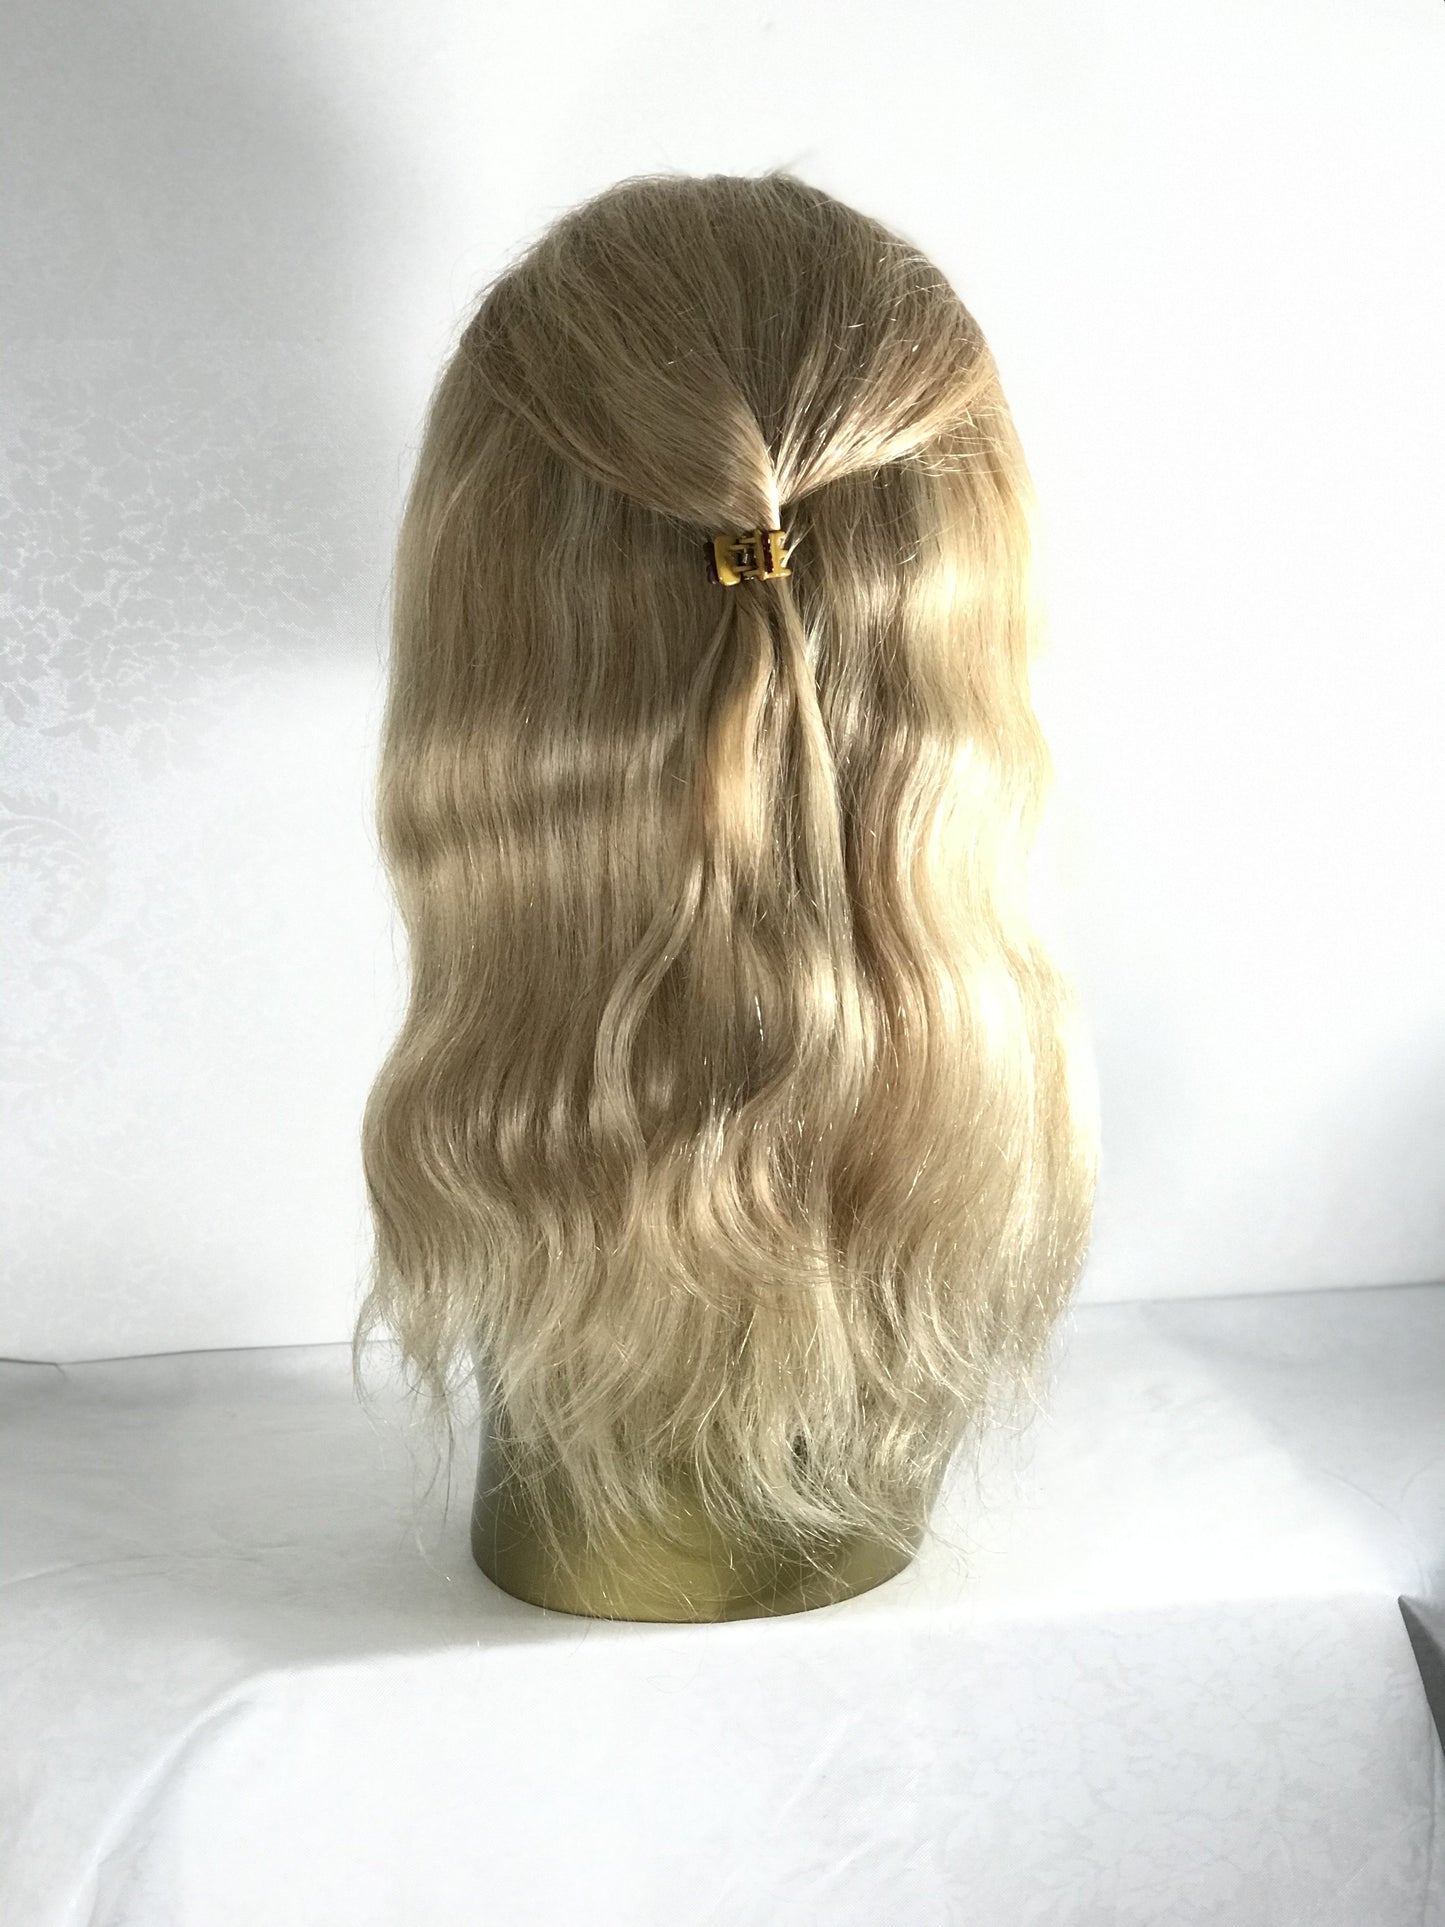 Custom Made Wig Blonde With Professional Balayage & Rooting Custom Coloring Service-  All That & More Salon Presents up to 50% off- Hope & Hair Breast Cancer Awareness Weekend Event